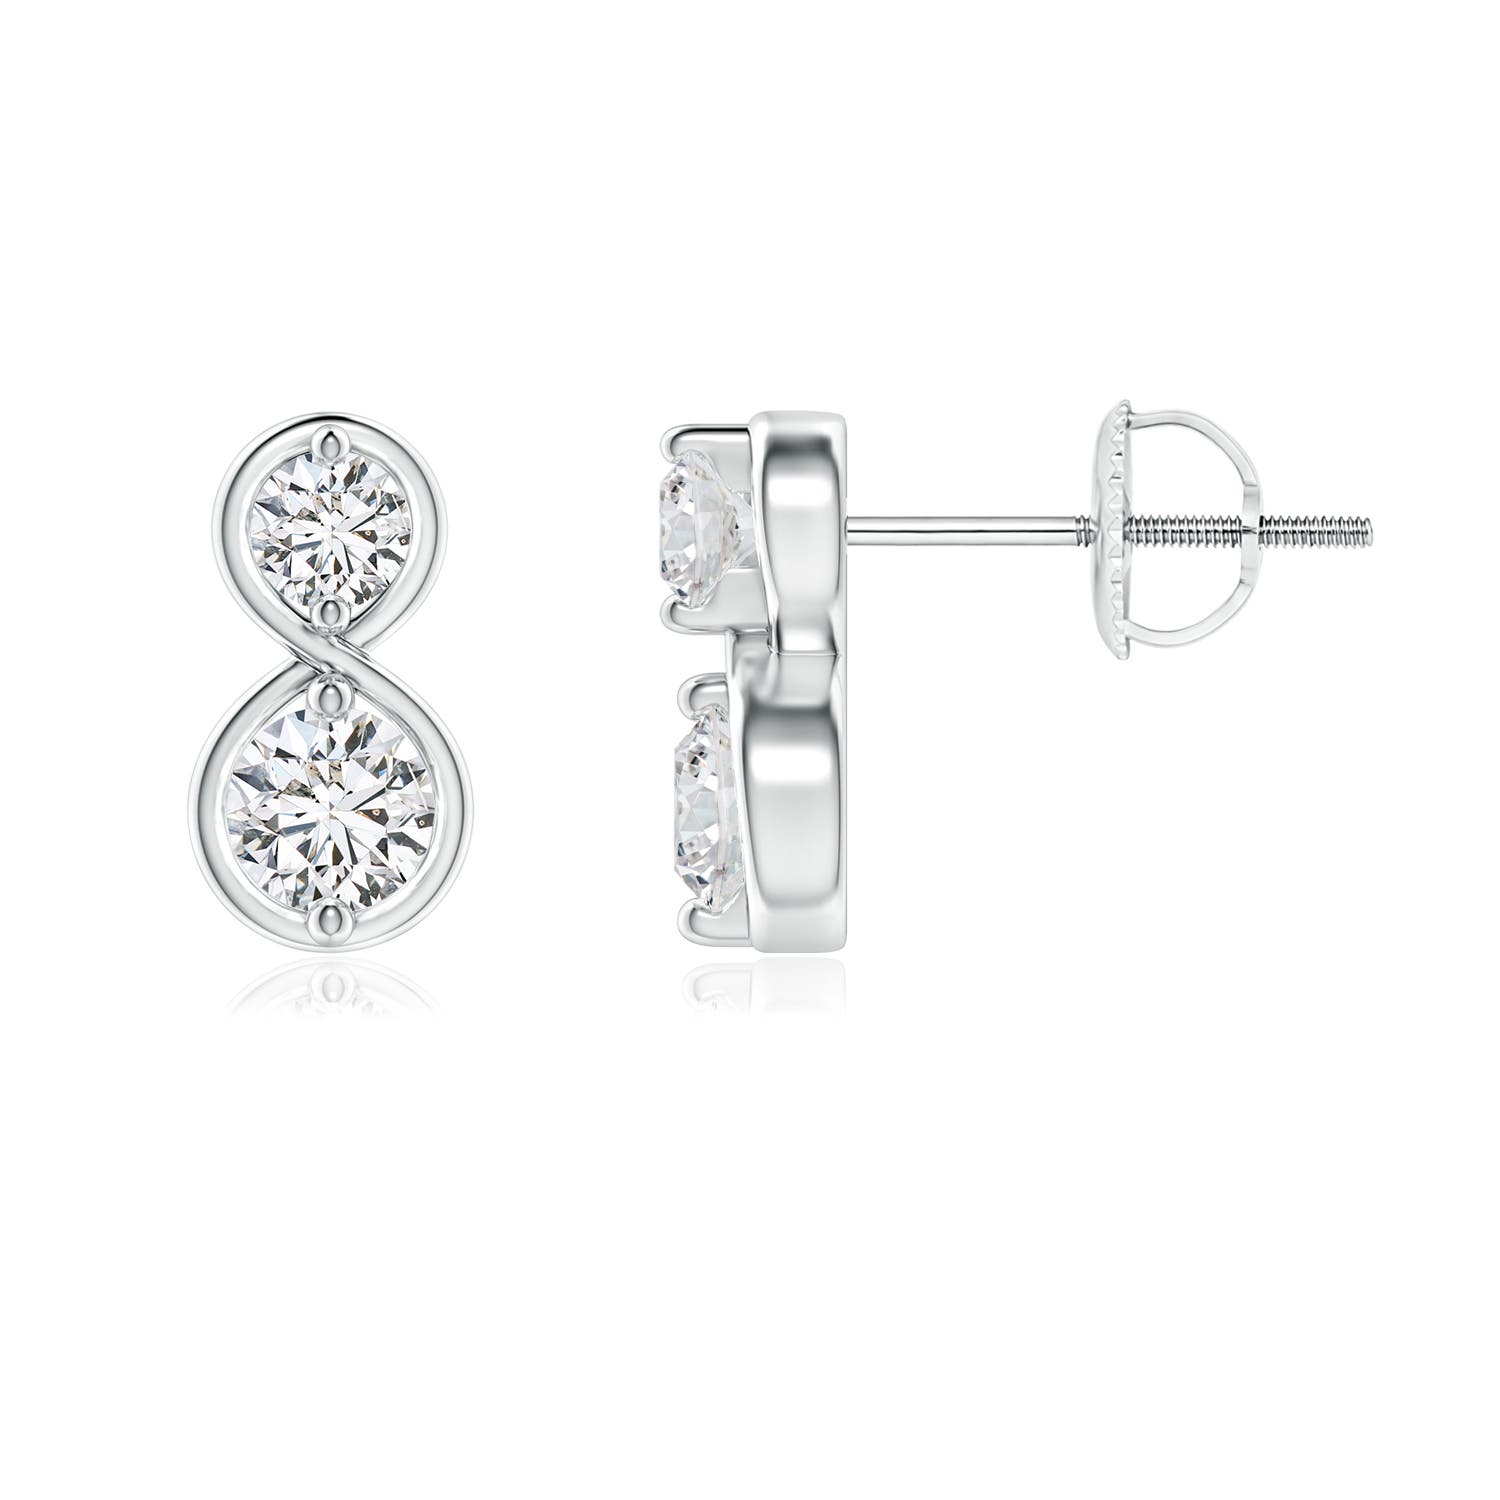 H, SI2 / 0.37 CT / 14 KT White Gold